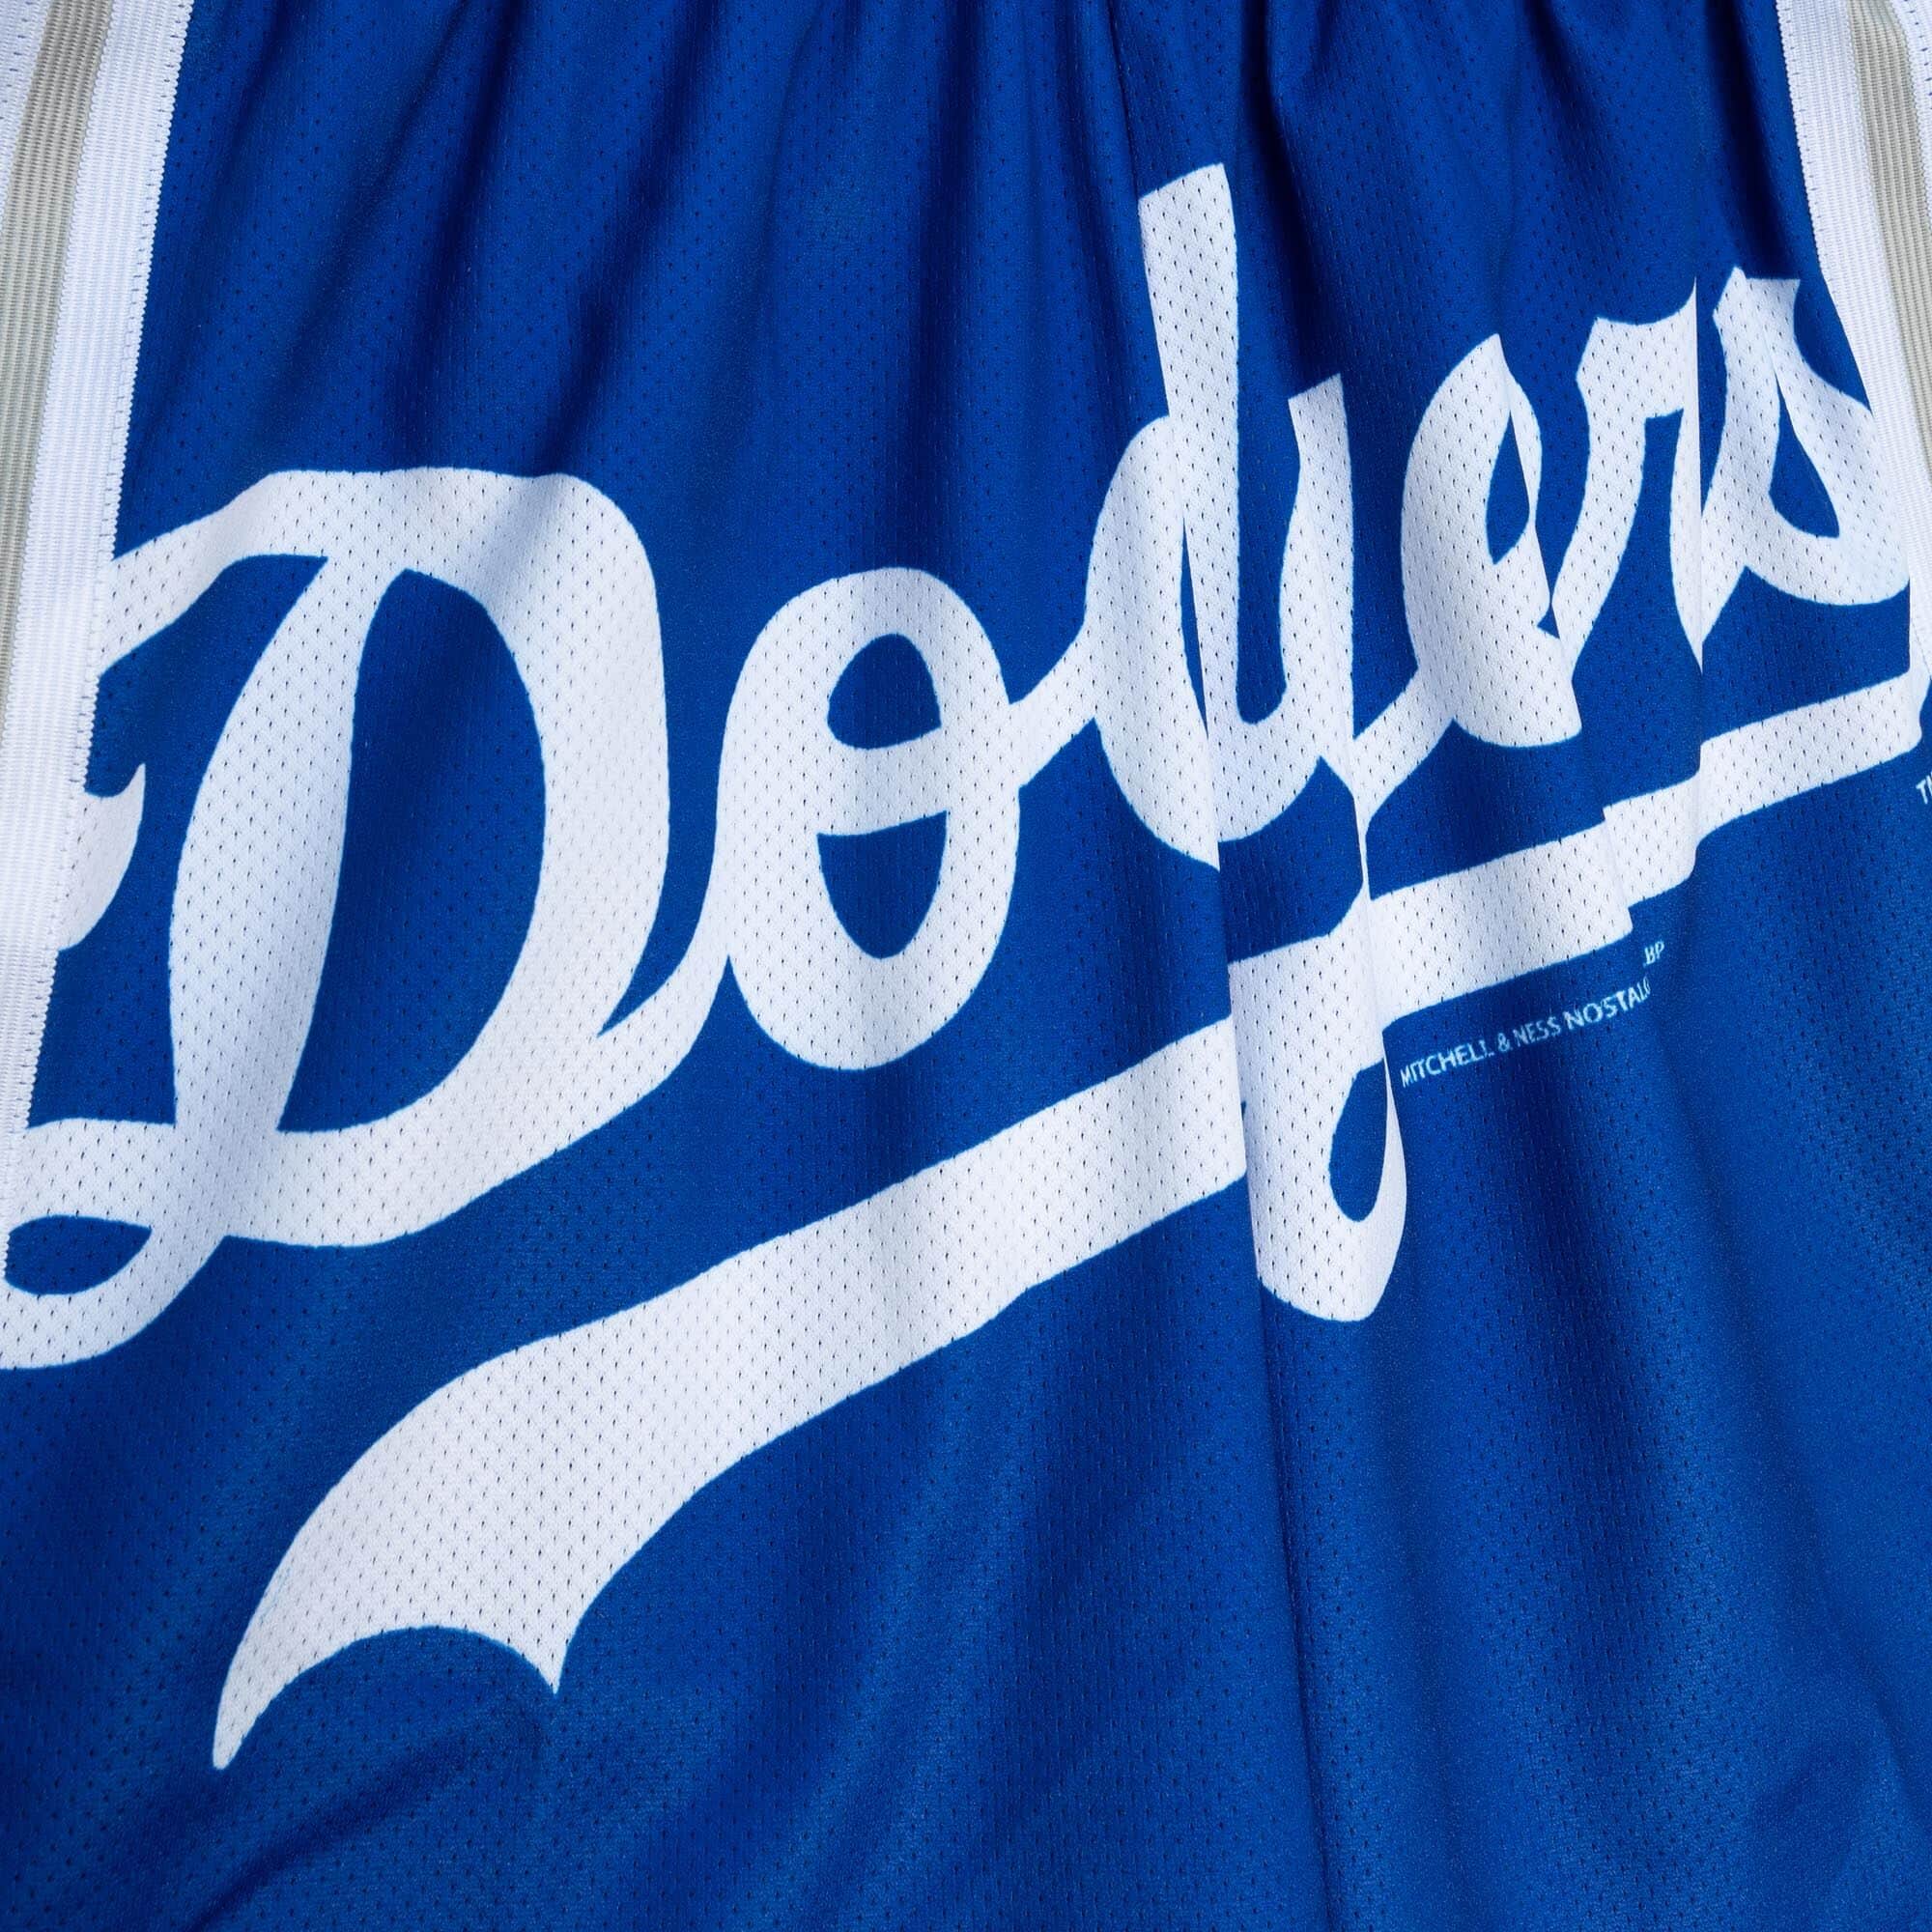 Mitchell & Ness Big Face Shorts Los Angeles Dodgers